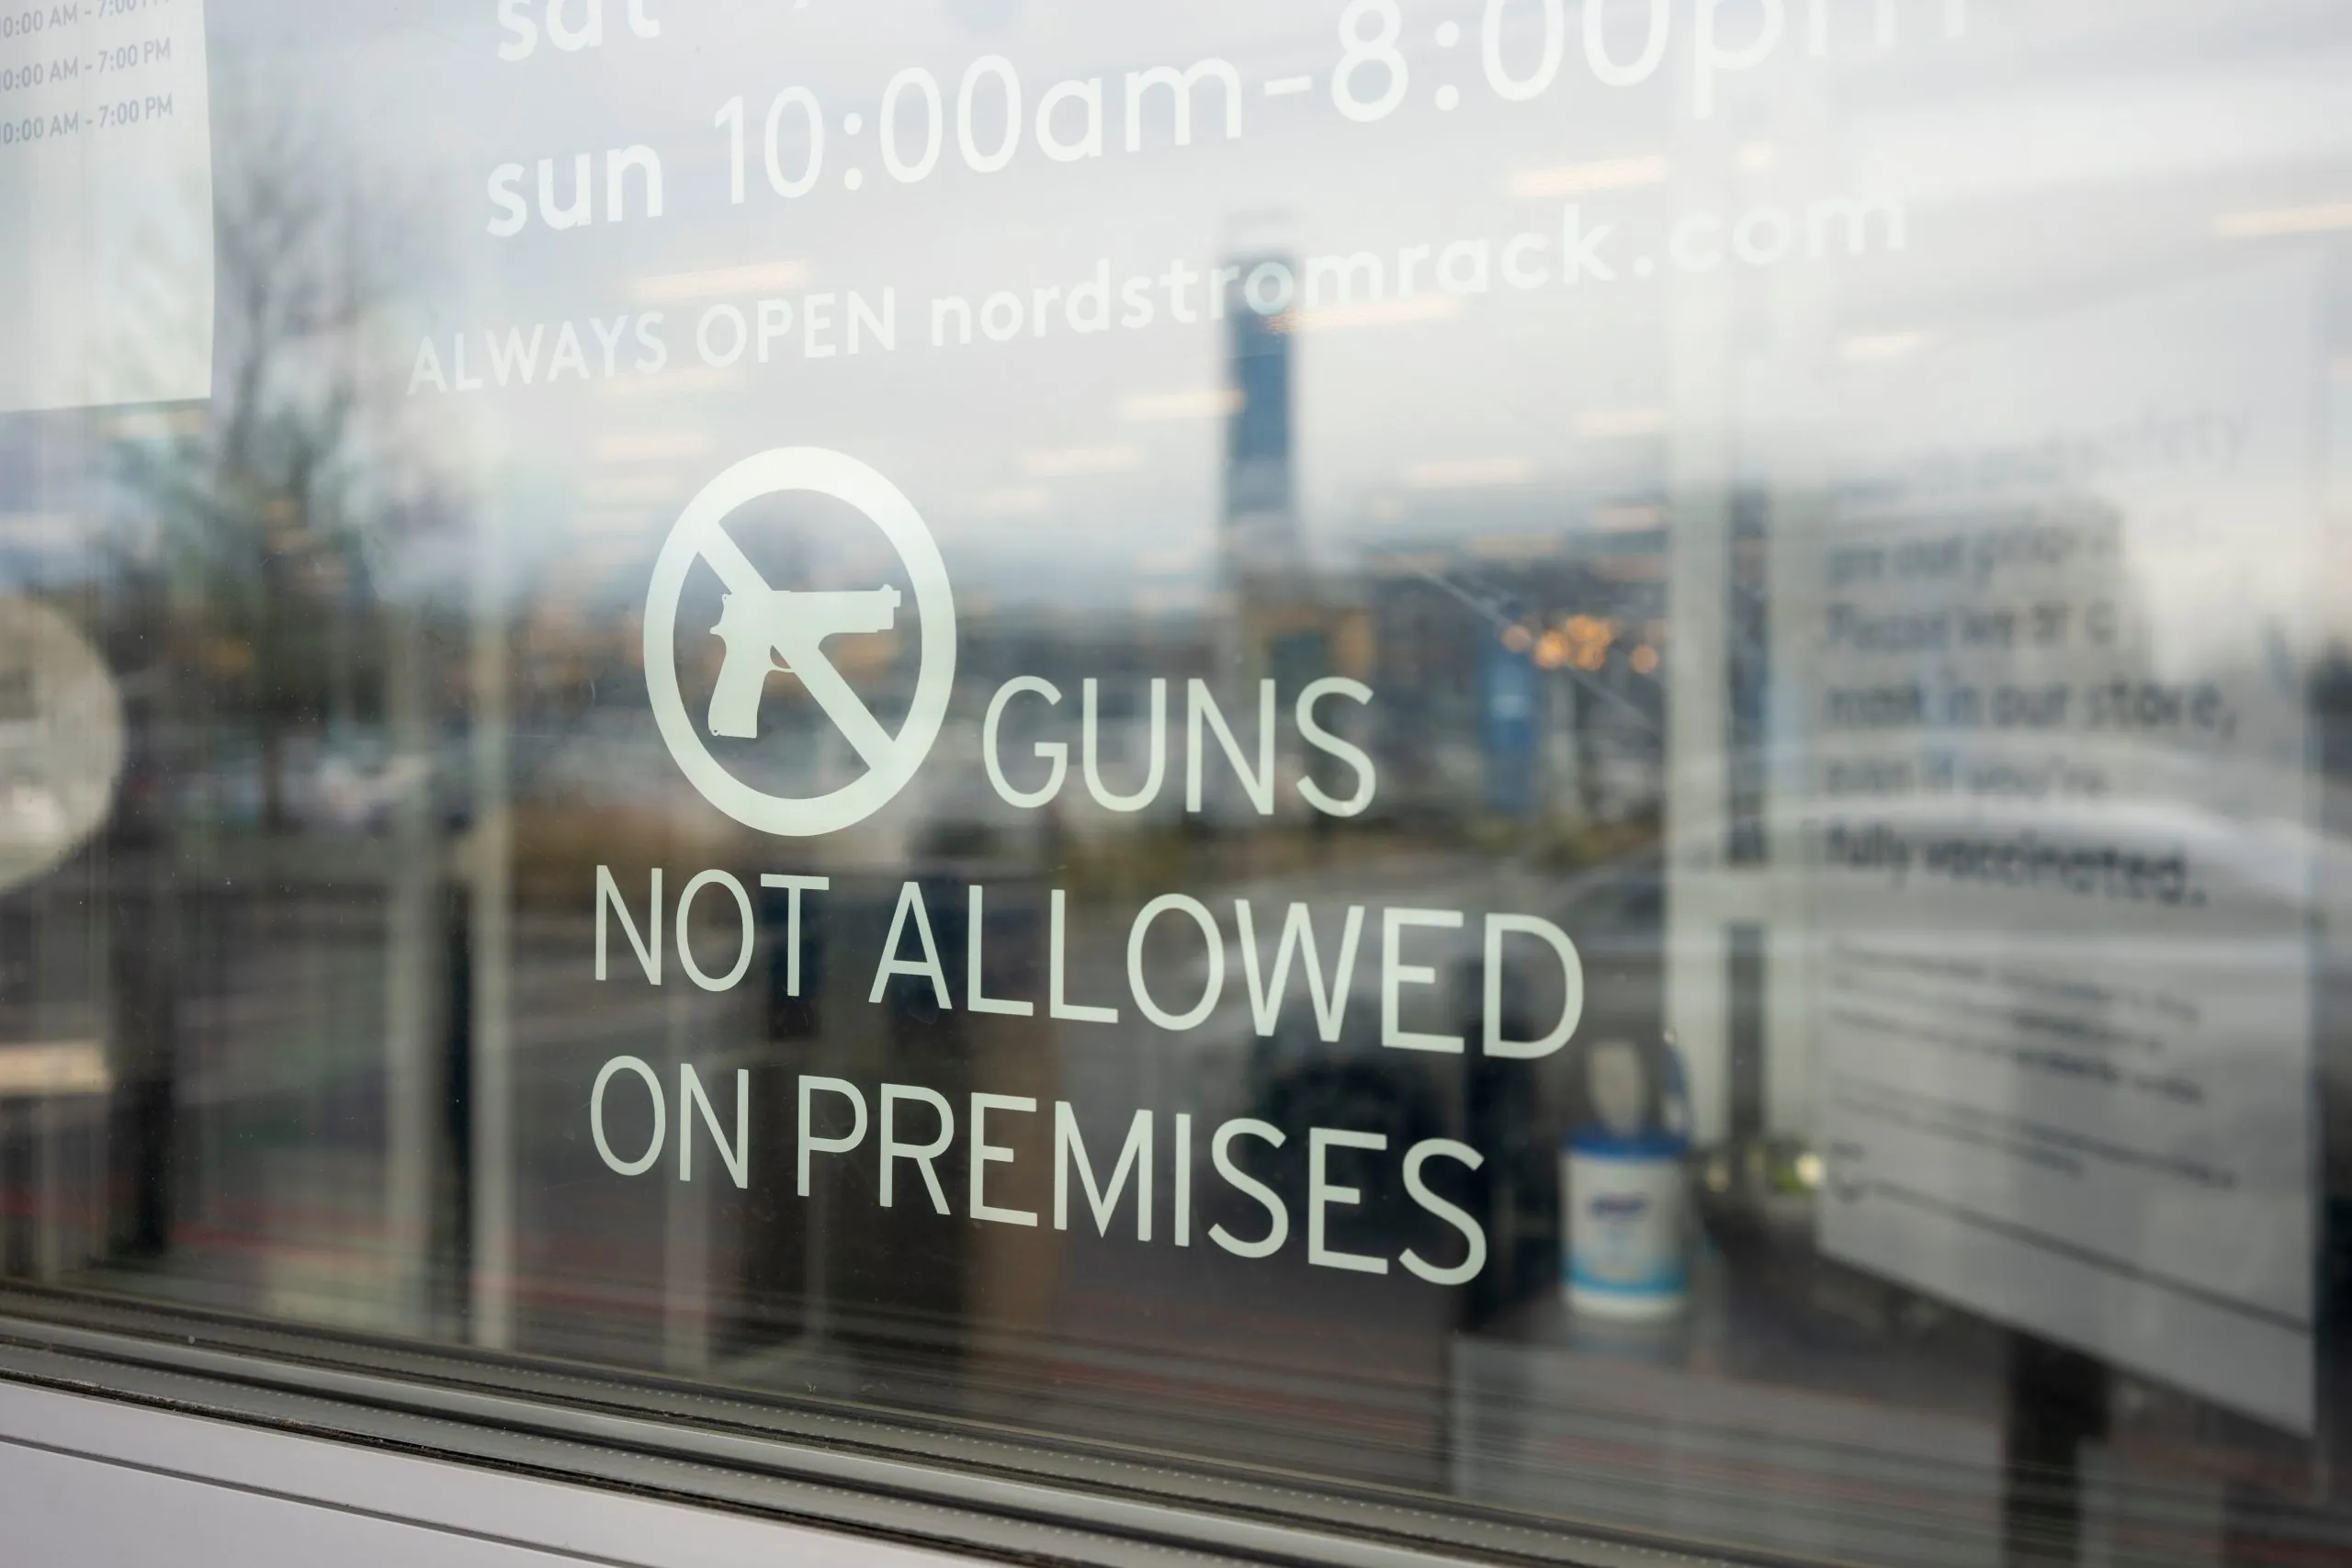 oregon gun laws and role of legal counsel